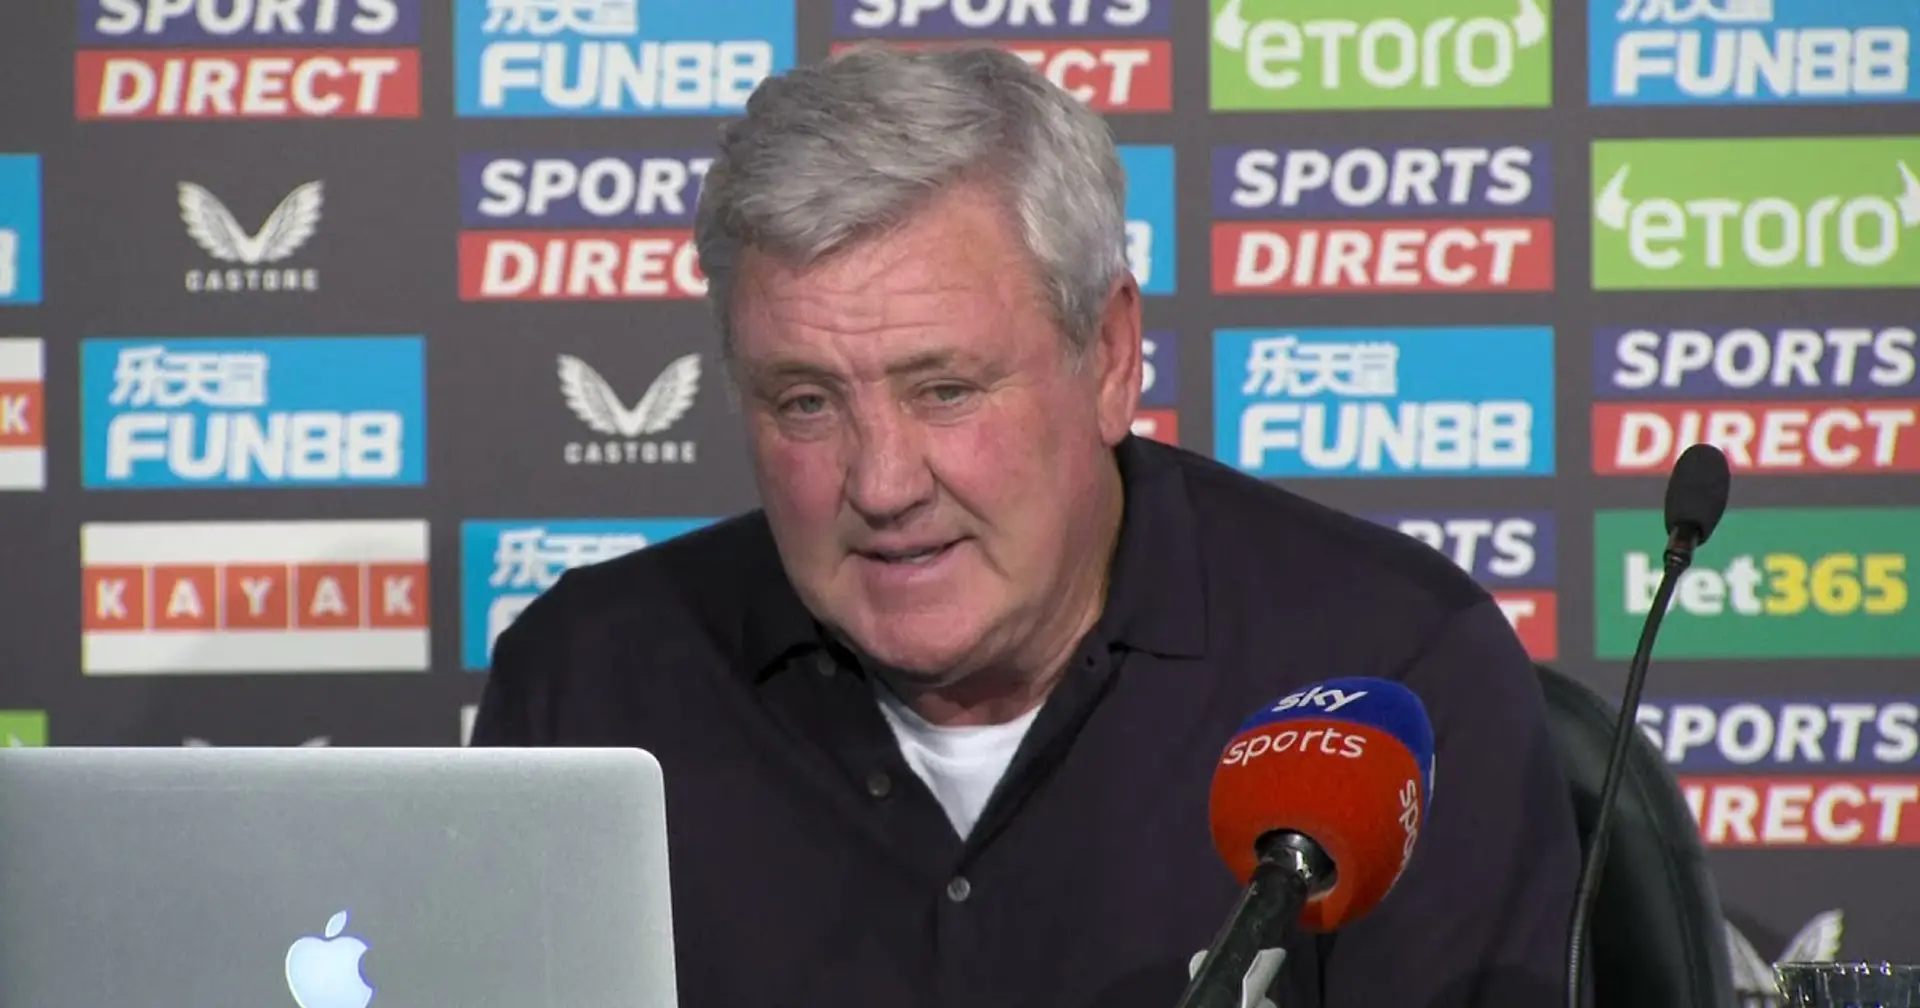 Steve Bruce slams reporters for not doing proper job as Newcastle confirm he stays for Spurs game